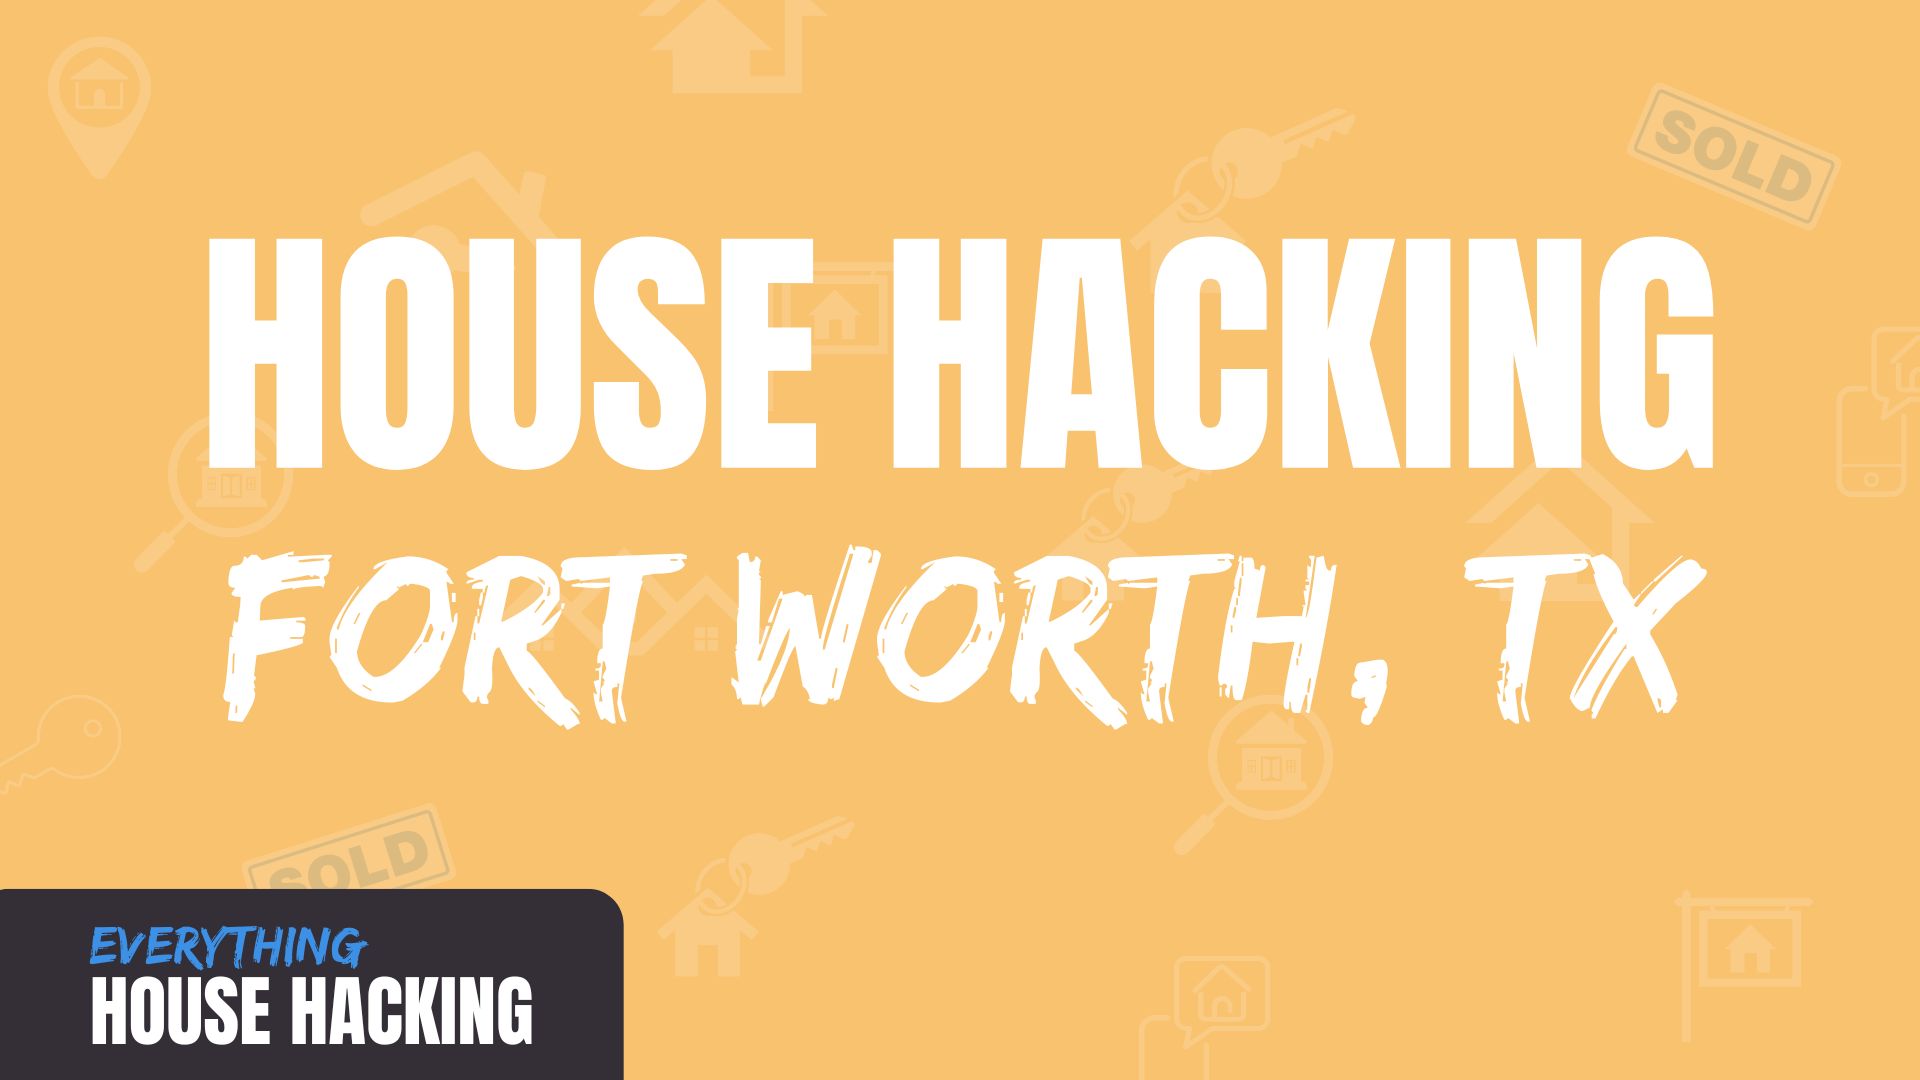 House hacking in fort worth, texas